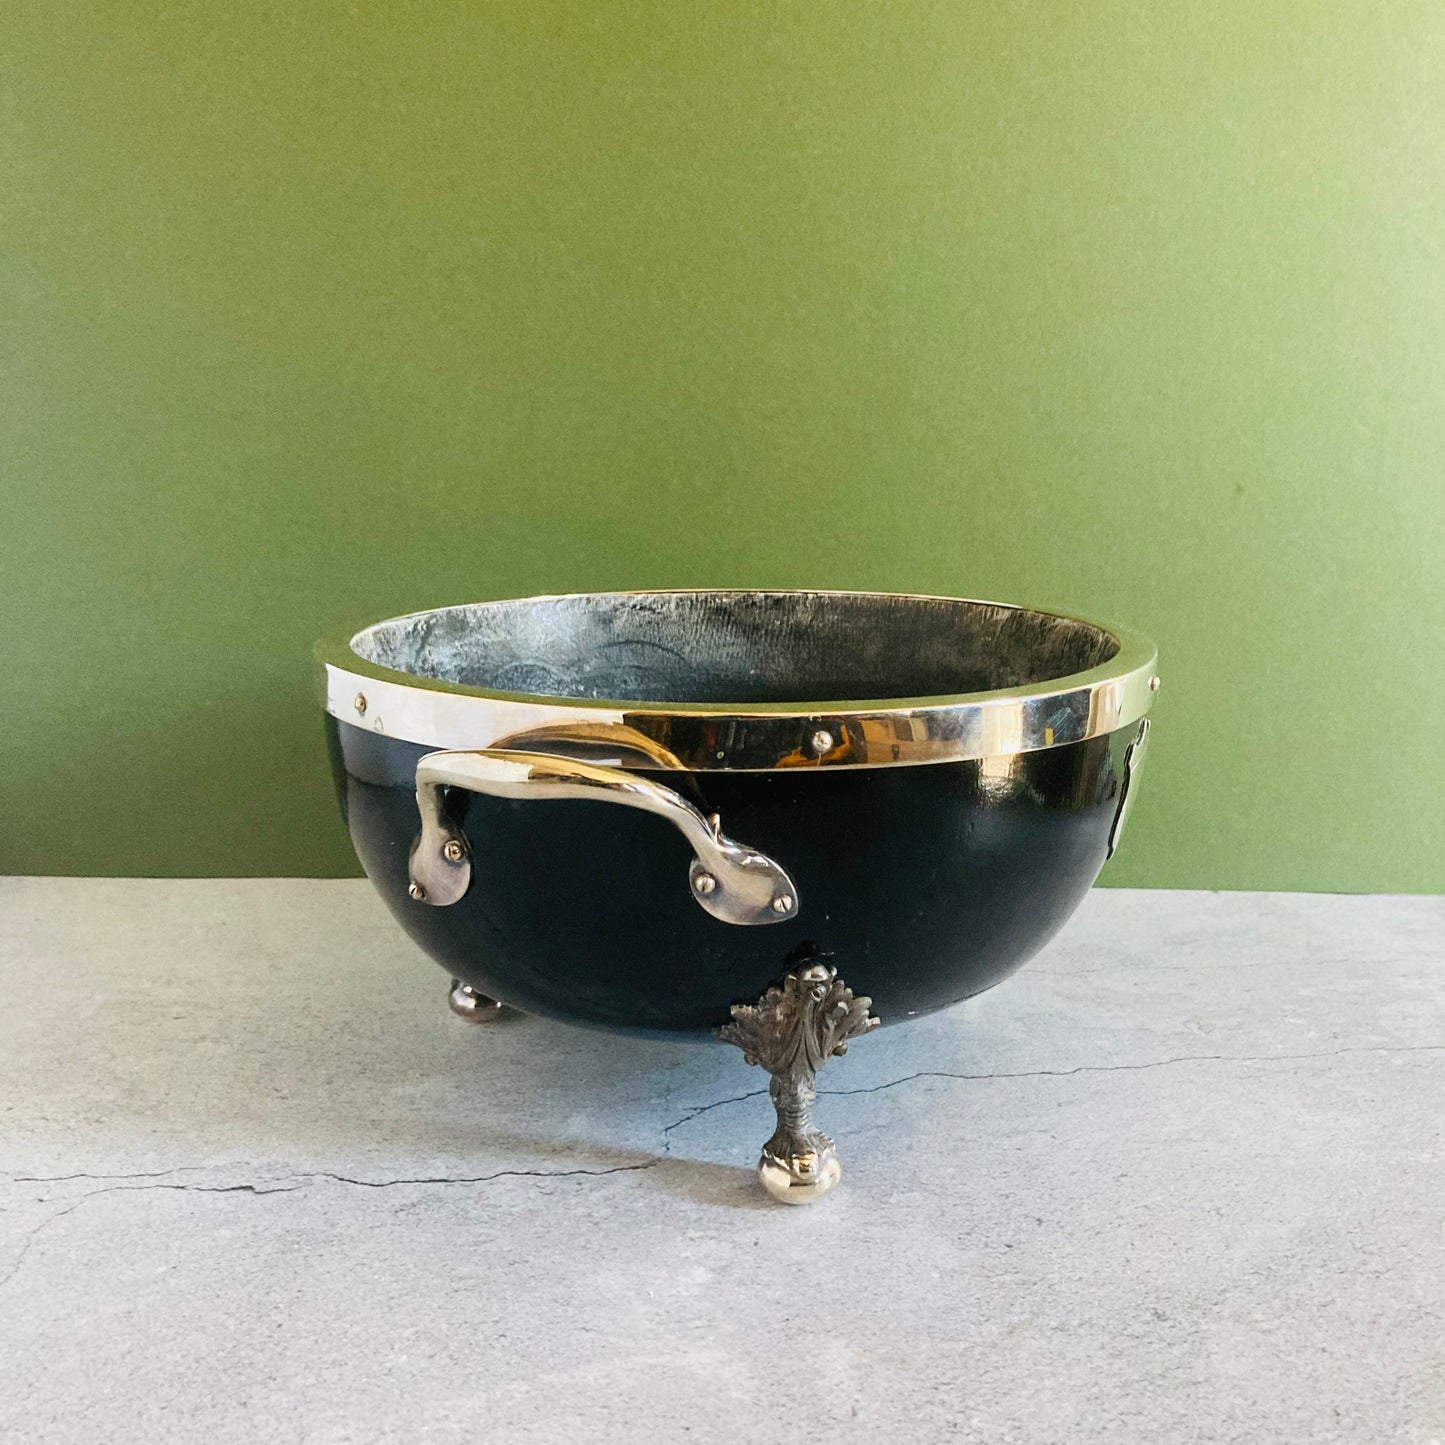 Antique and Awesome Wooden and Silver Salad Trophy Bowl